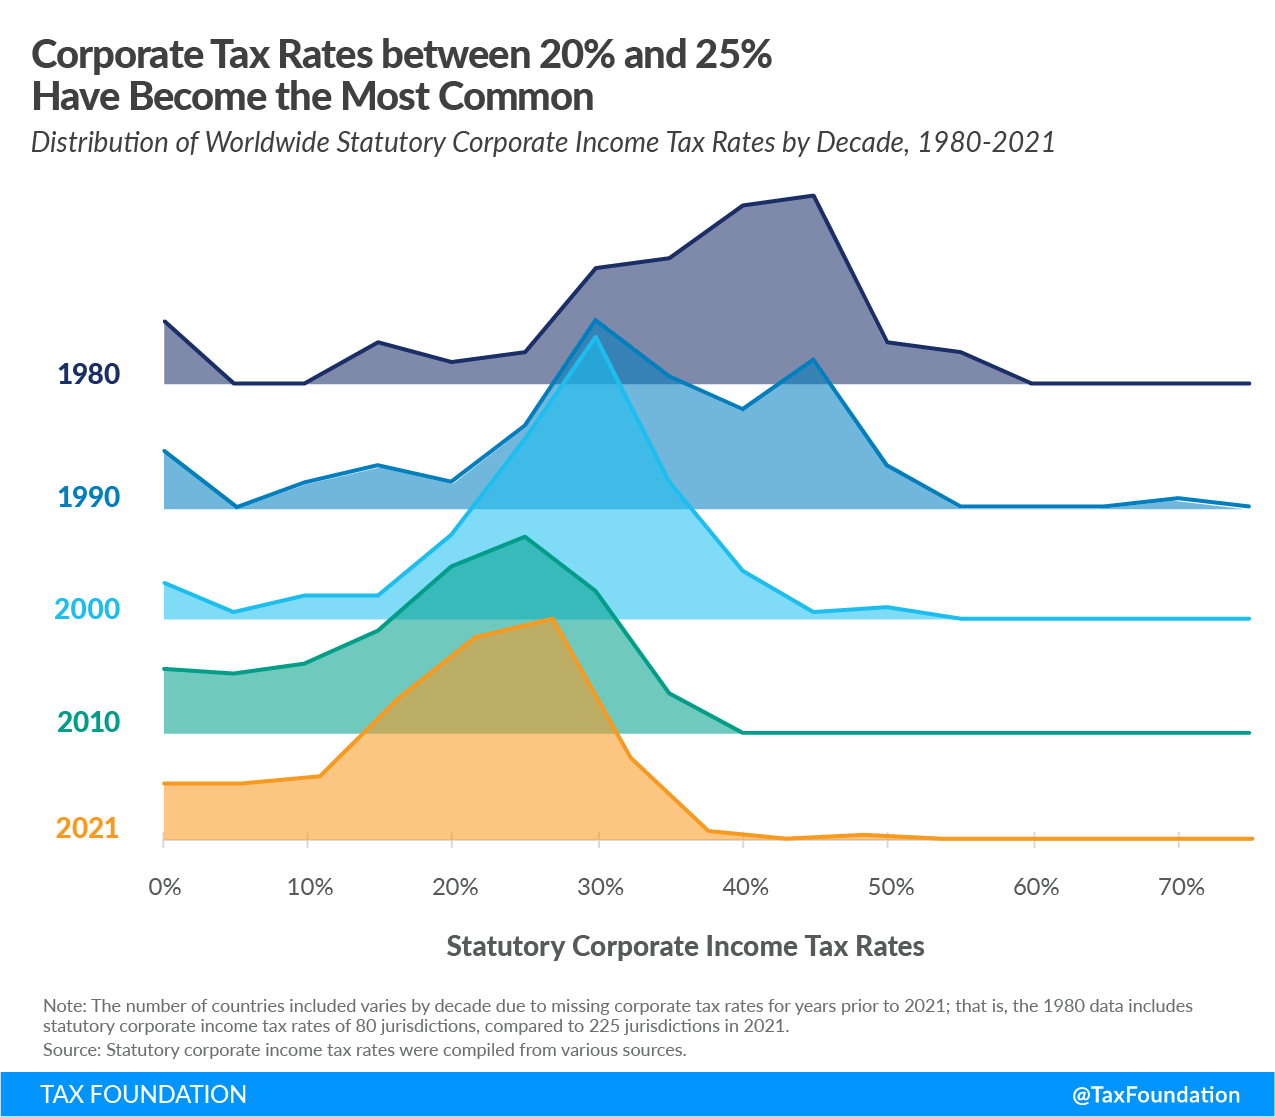 2021 corporate tax rates by country, corporate tax rate trends, Irelands corporate tax rate, G7 corporate tax rate, and corporate tax rates globally, 2021 corporate tax rates around the world